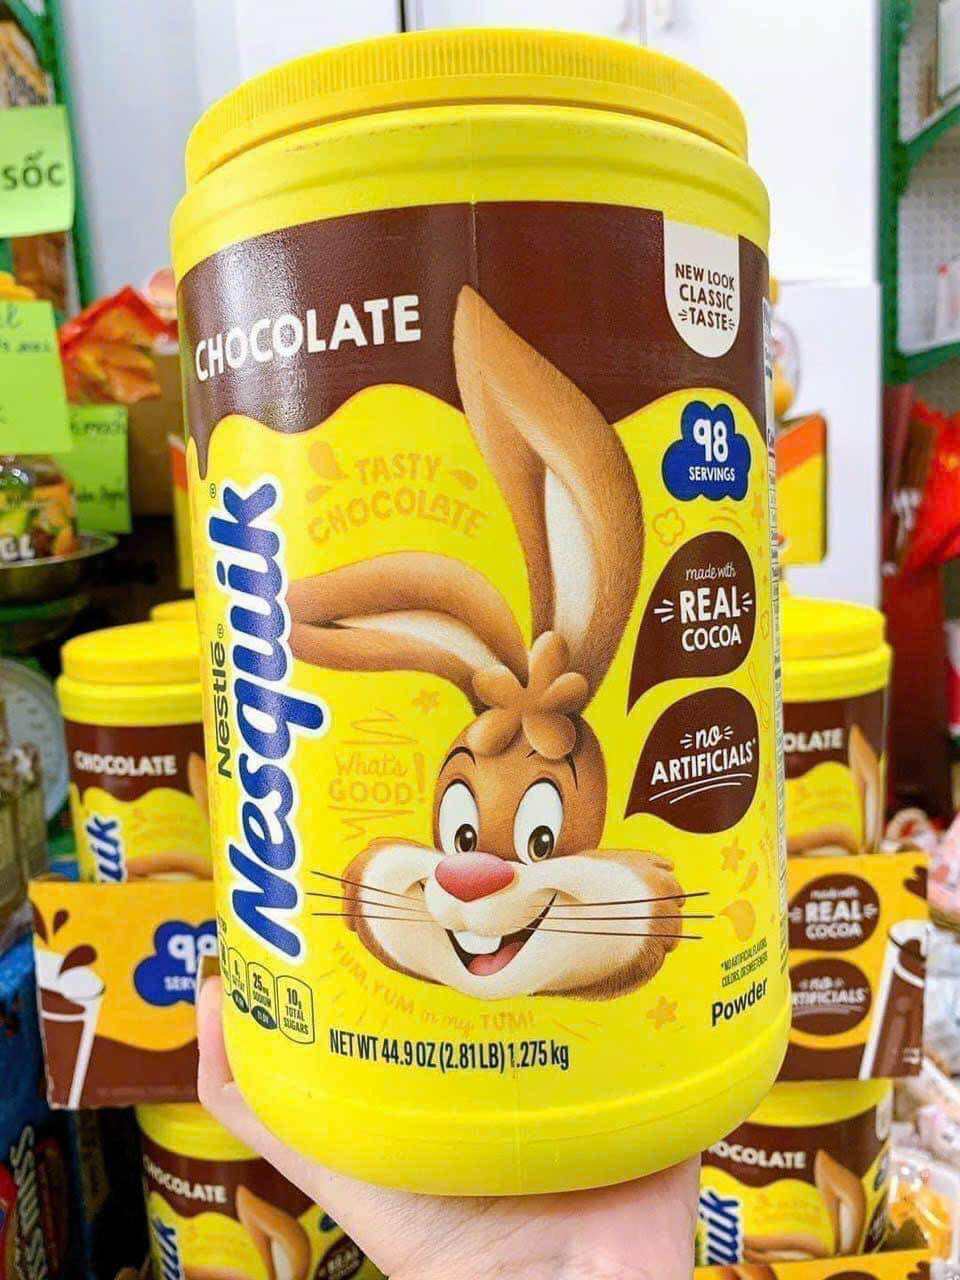 Bột Cacao Nesquik Chocolate Flavor Tasty Chocolate Hộp 1.275 kg Của Mỹ